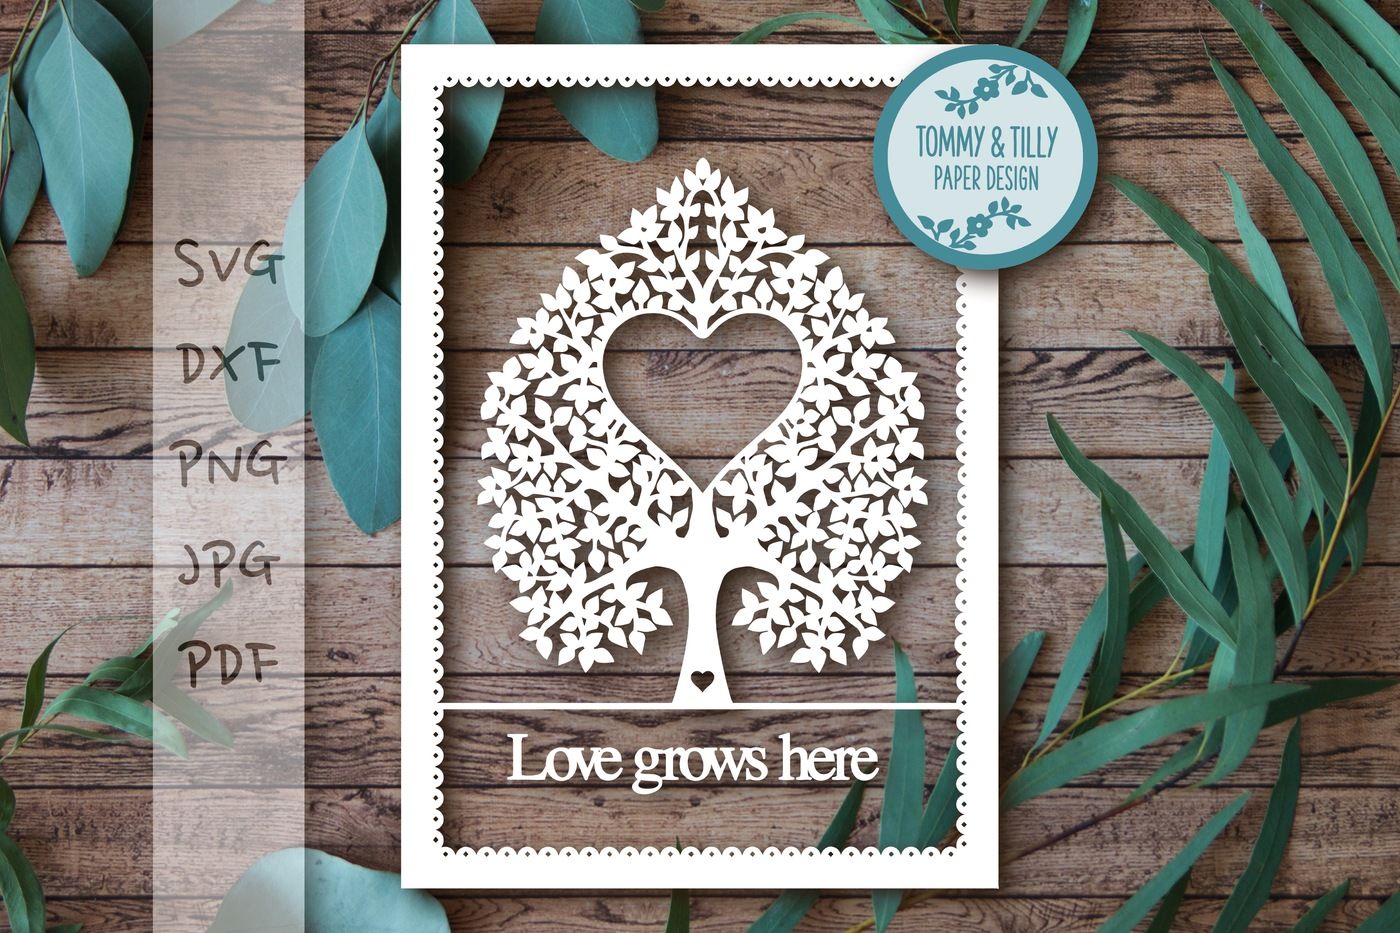 Download Wedding Tree Svg Dxf Png Pdf Jpg By Tommy And Tilly Design Thehungryjpeg Com